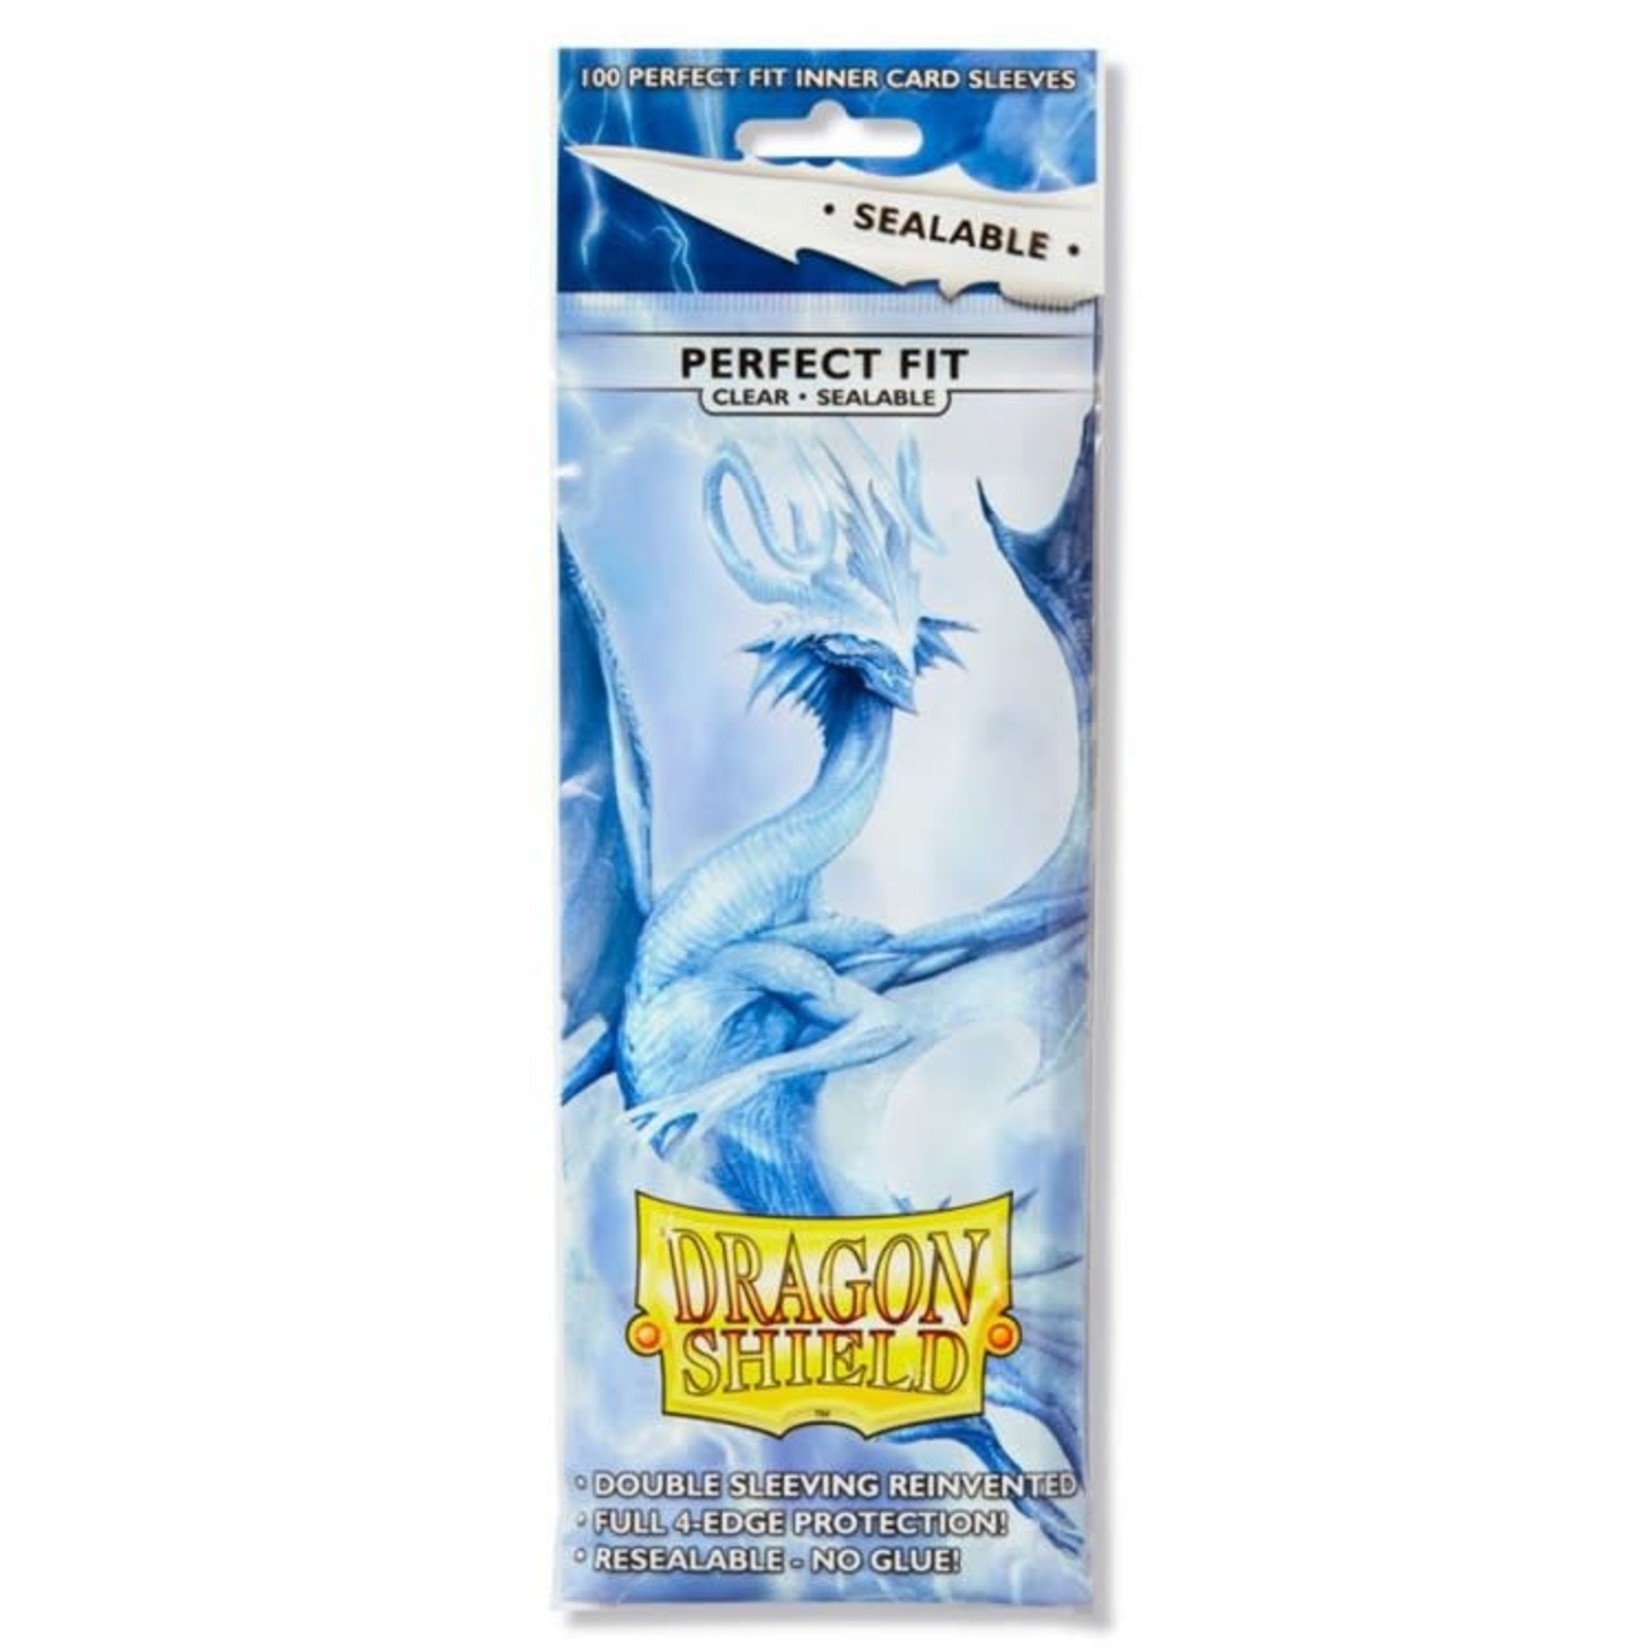 Arcane Tinmen Dragon Shield Perfect Fit Sleeves Sealable Clear 100 ct